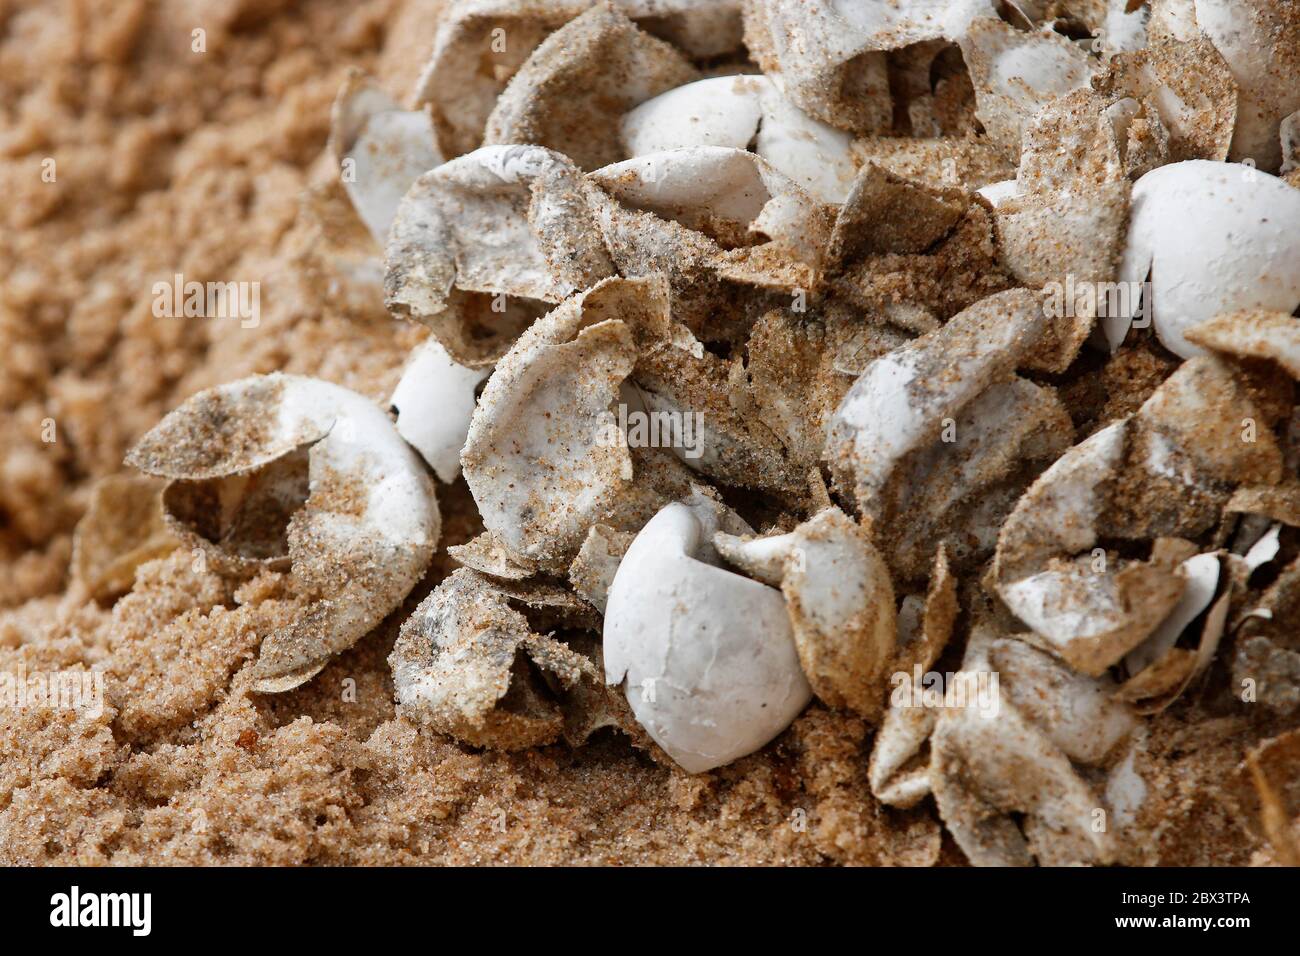 Sea turtle eggs in nest at beach. Hatching of endangered specie protected. Hatchling, baby newborn in nature, vulnerable animal wildlife conservation. Stock Photo